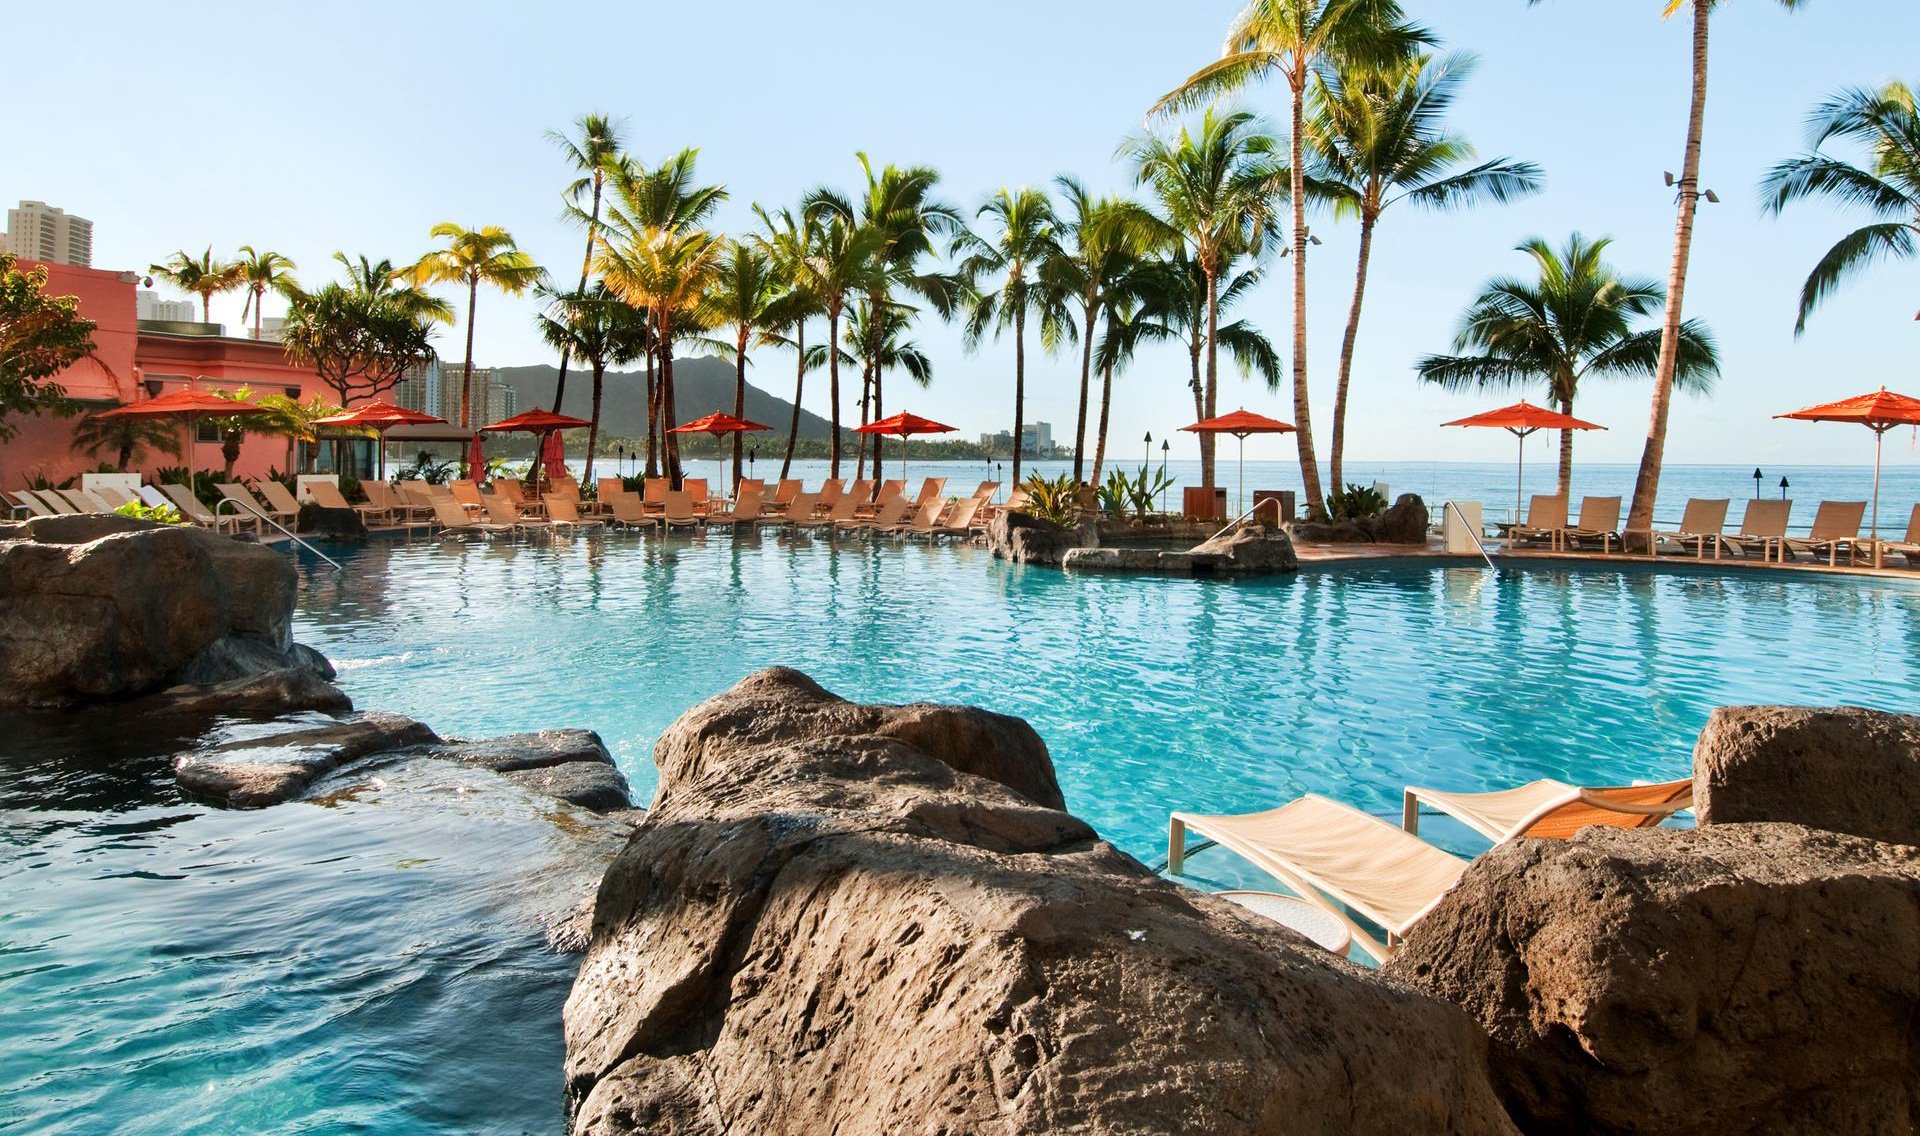 Travel to Hawaii in 2016